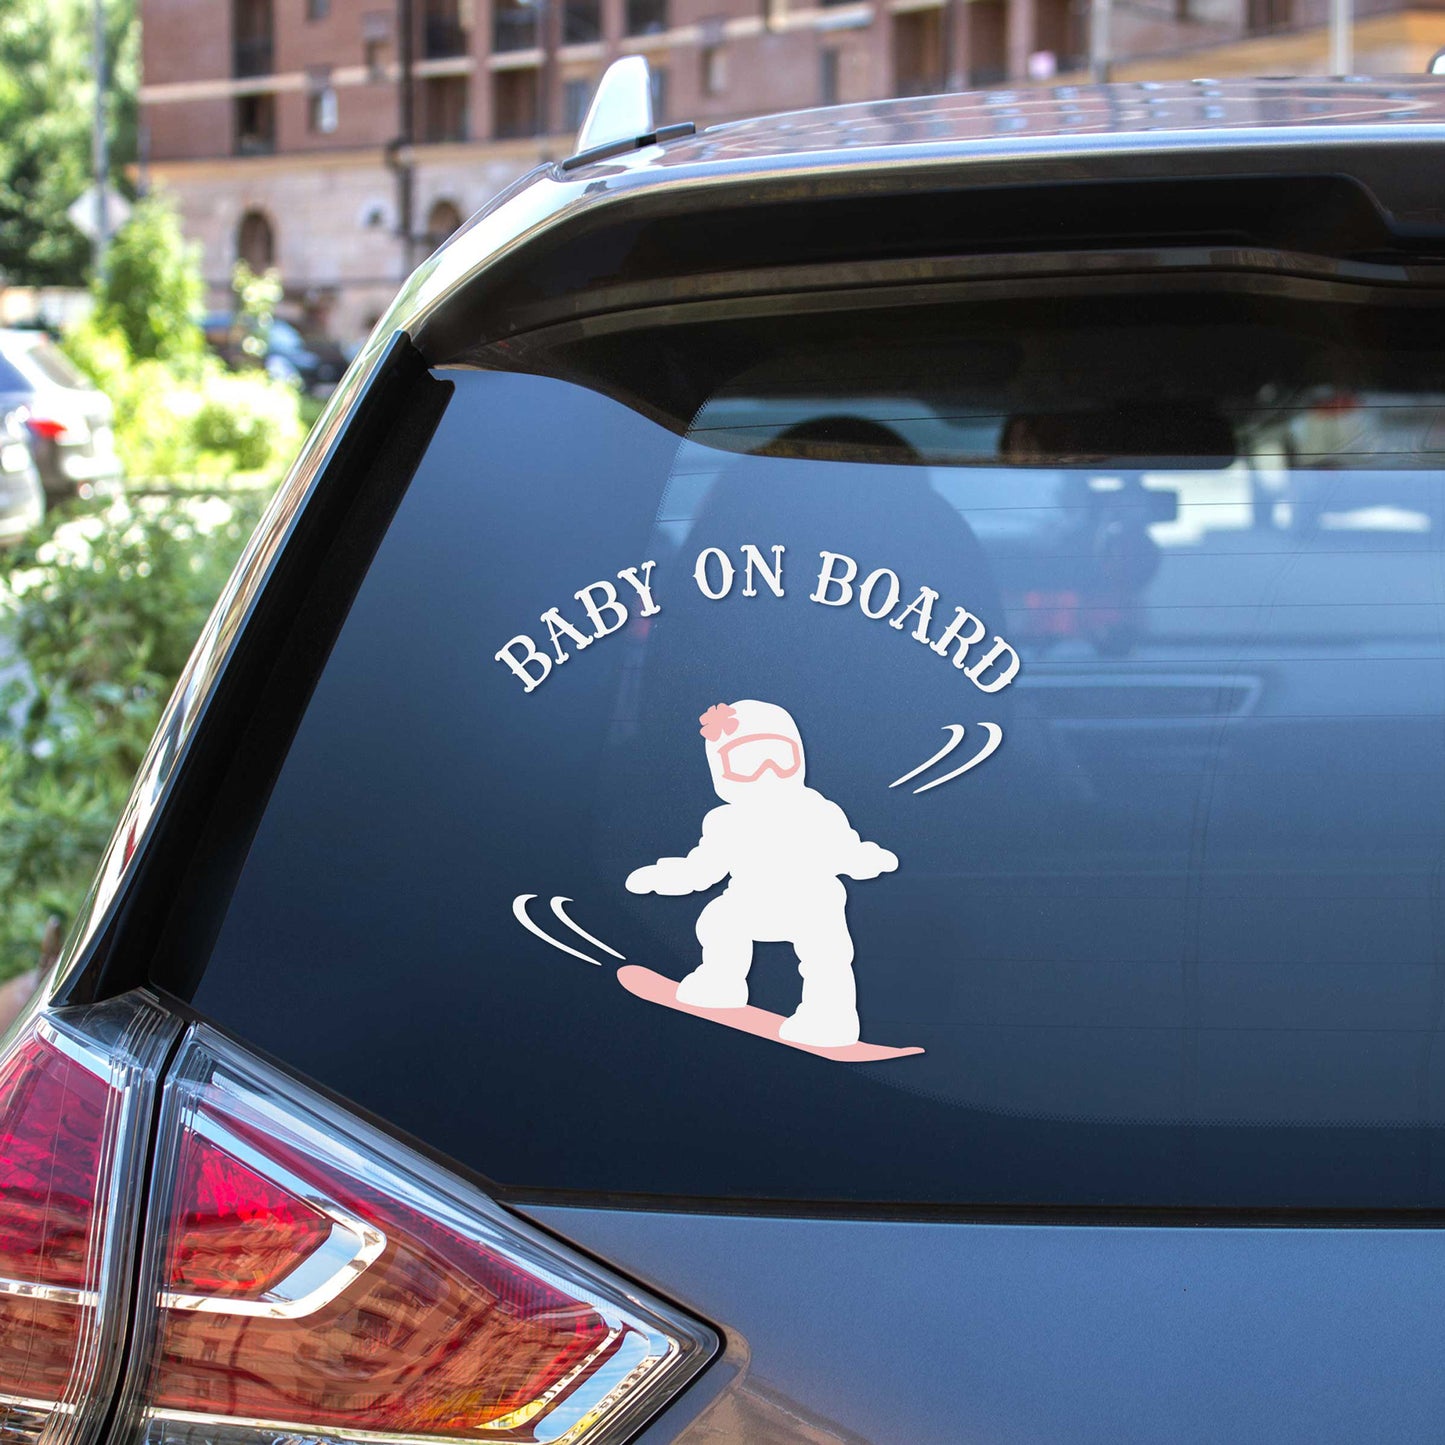 
                  
                    Baby on Board - Snowboarding Girl svg car decal on the rear window of a SUV
                  
                